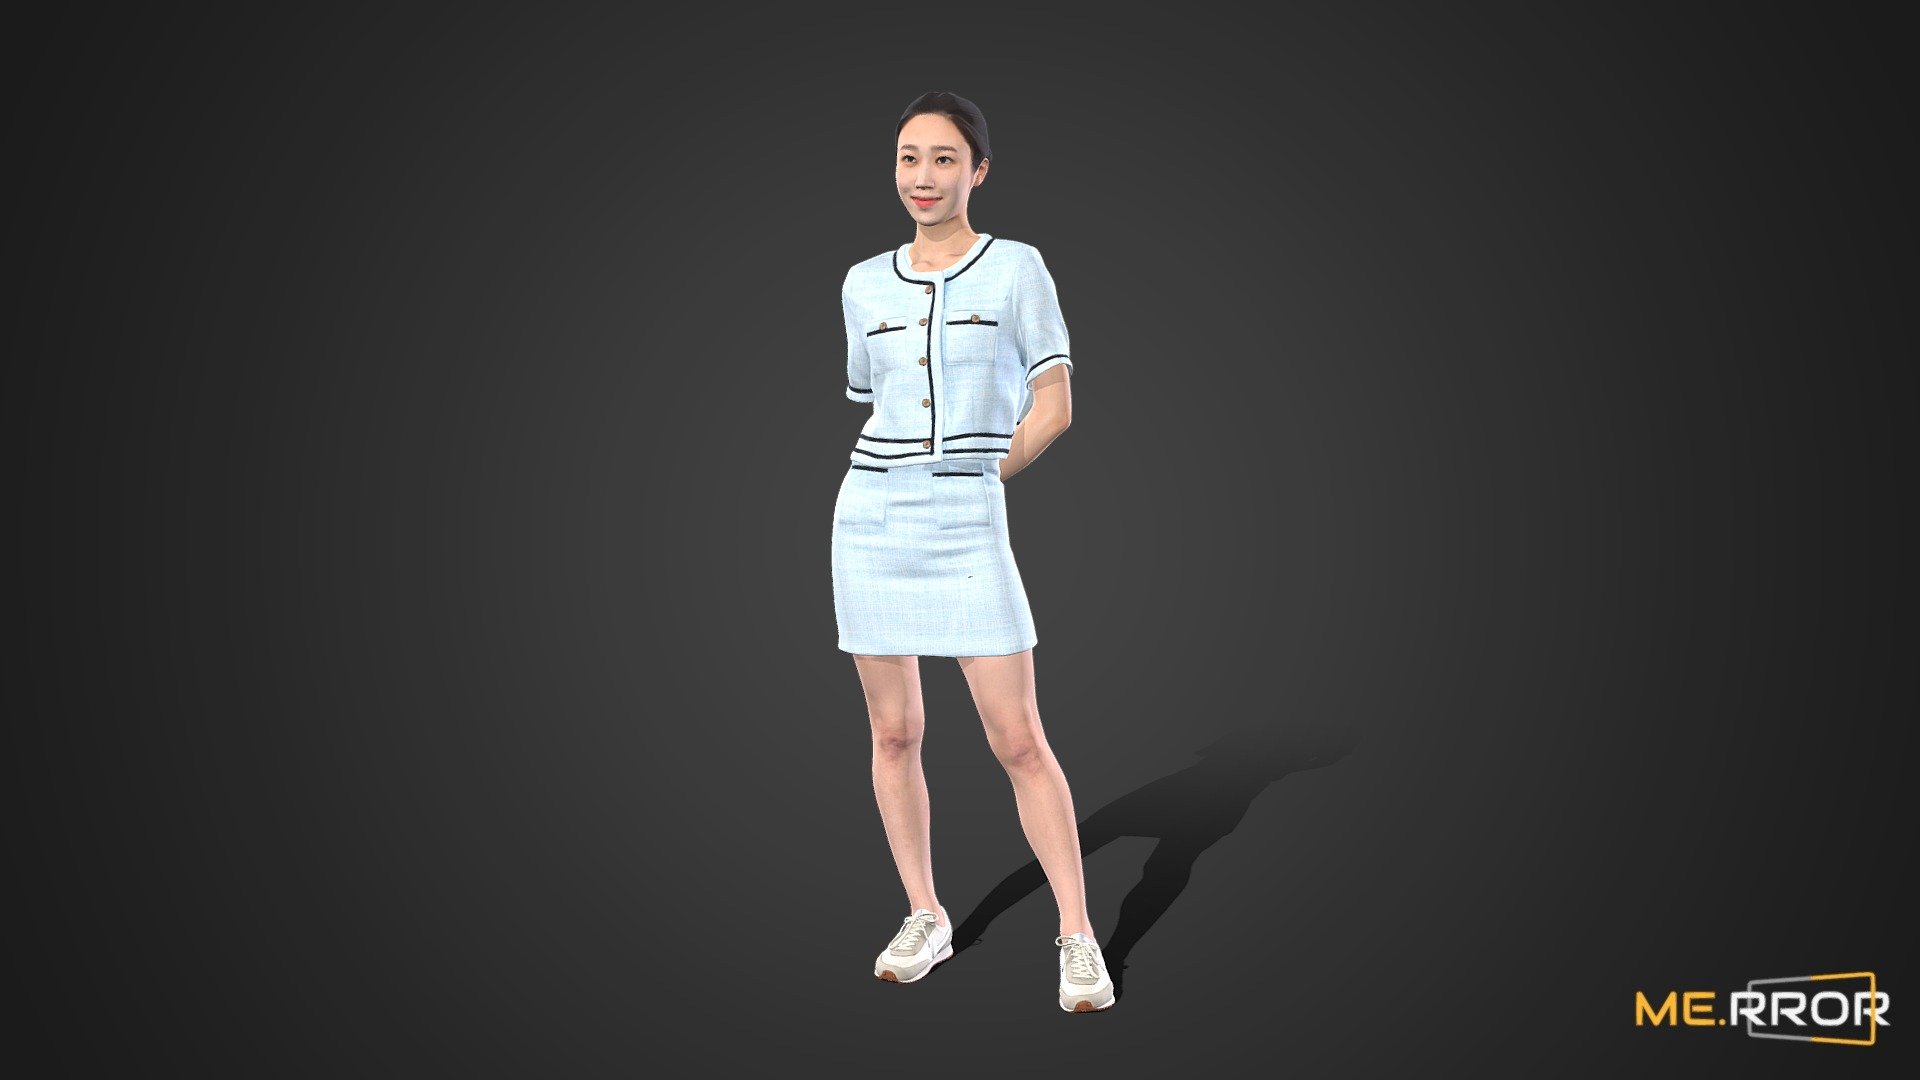 ME.RROR


From 3D models of Asian individuals to a fresh selection of free assets available each month - explore a richer diversity of photorealistic 3D assets at the ME.RROR asset store!

https://me-rror.com/store




[Model Info]




Model Formats : FBX, MAX


Texture Maps (8K) : Diffuse




Find Scanned - TPO version here: https://sketchfab.com/3d-models/game-ready-asian-woman-scan-posed-22-4747c293c4aa4357a412870e90e59ee5



If you encounter any problems using this model, please feel free to contact us. We'd be glad to help you.



[About ME.RROR]

Step into the future with ME.RROR, South Korea's leading 3D specialist. Bespoke creations are not just possible; they are our specialty.

Service areas:




3D scanning

3D modeling

Virtual human creation

Inquiries: https://merror.channel.io/lounge - Asian Woman Scan_Posed 22 100K poly - 3D model by ME.RROR Studio (@merror) 3d model